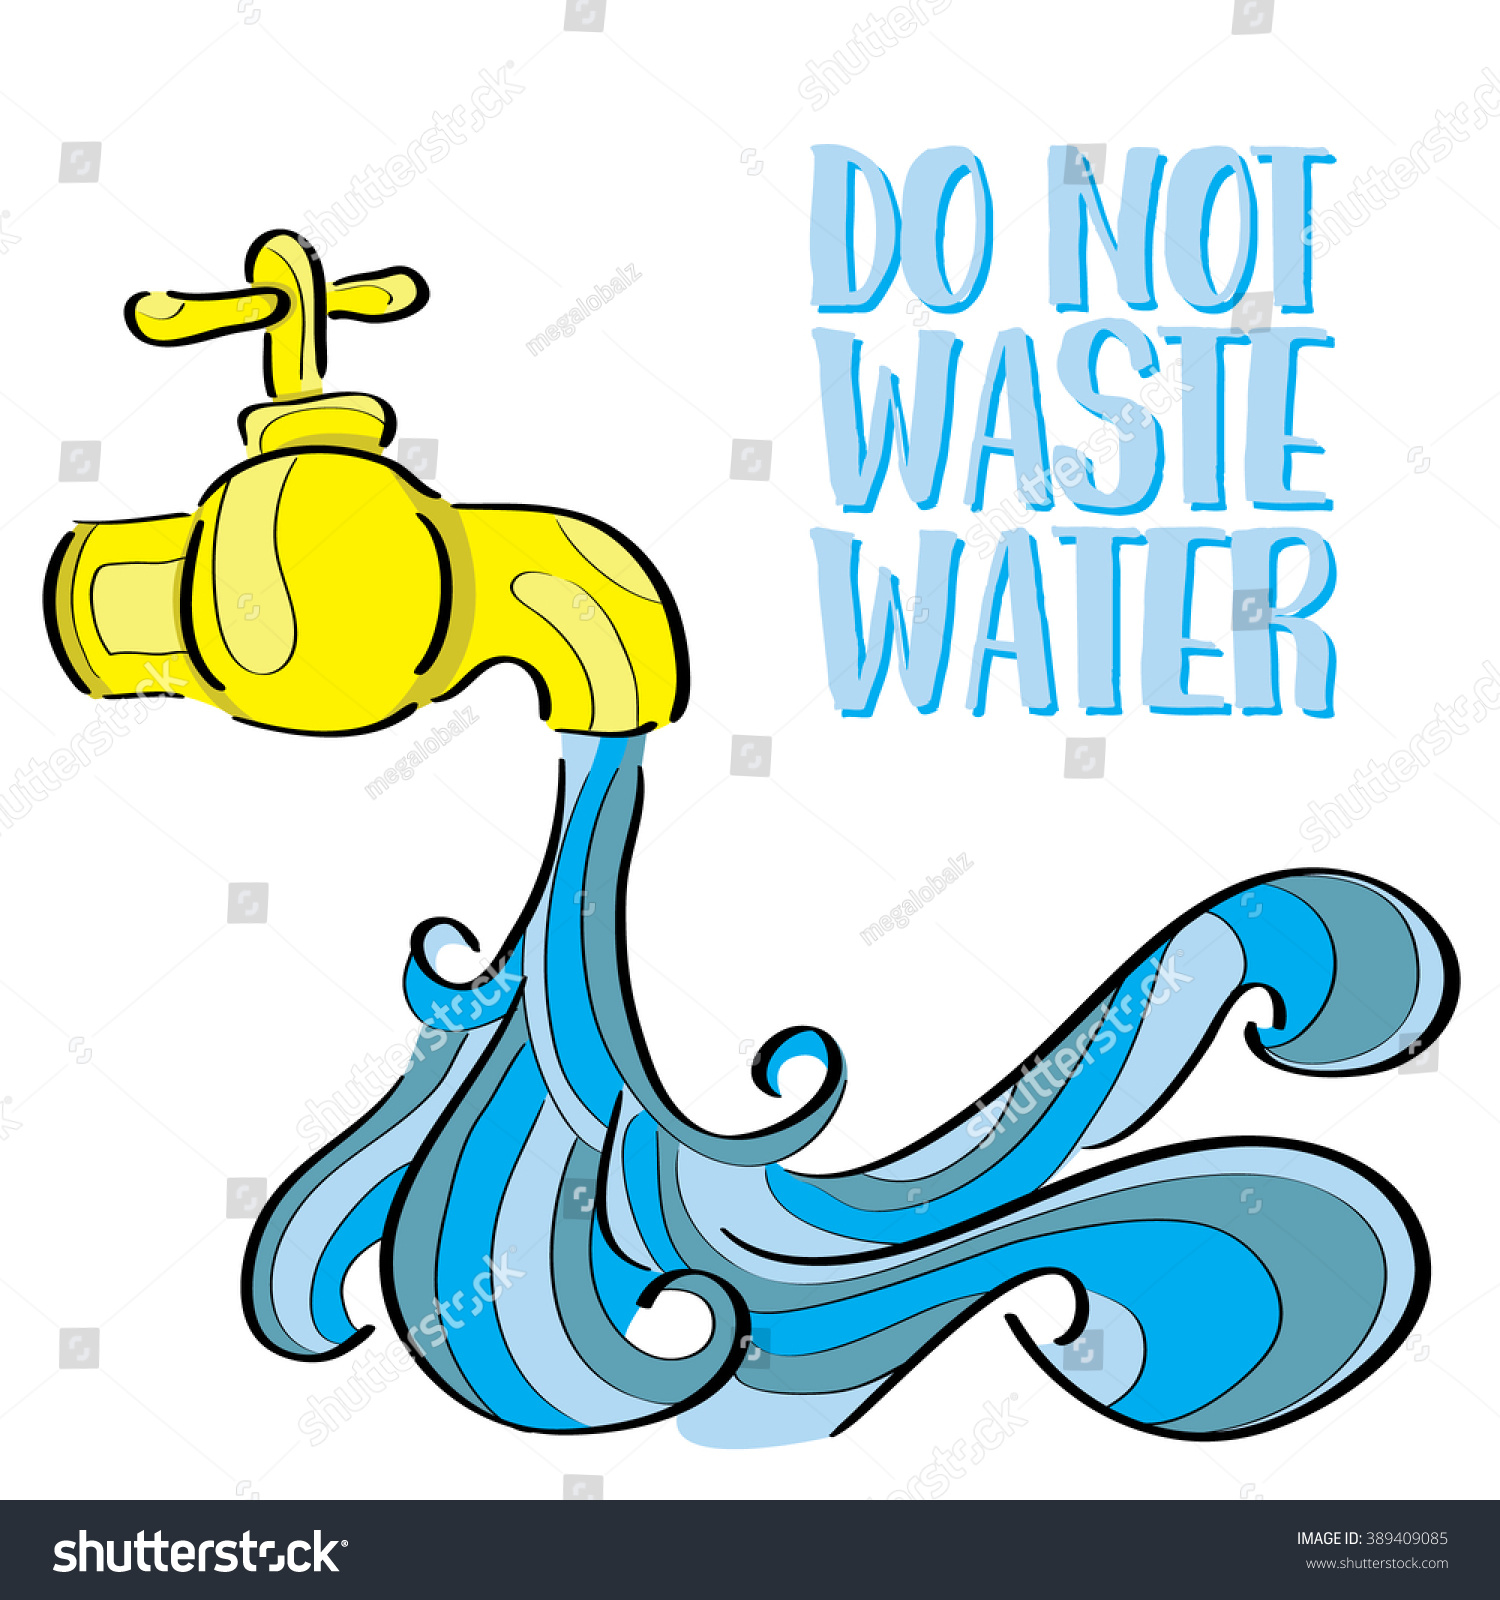 Do not waste Water